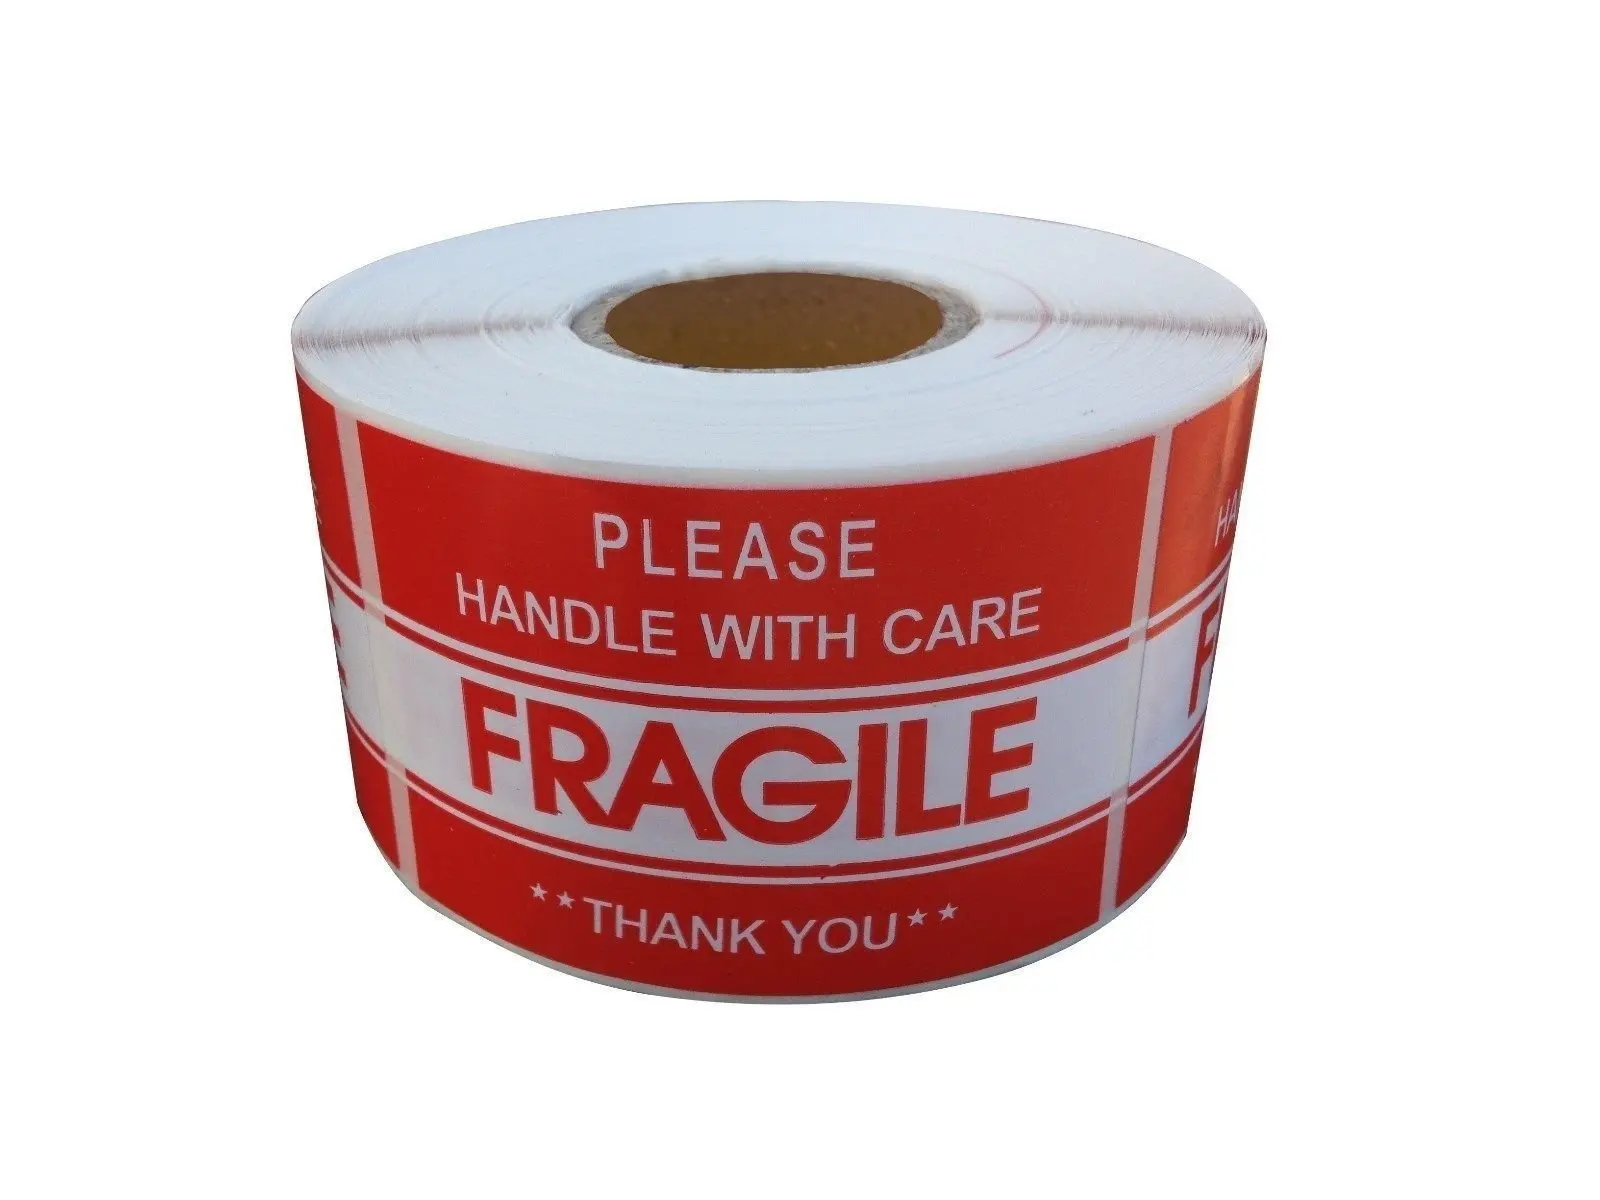 500 LabelsRoll 10 Rolls Thank You Shipping Labels Stickers 5000 Labels Fragile Stickers 2 x 3 Fragile Handle with Care